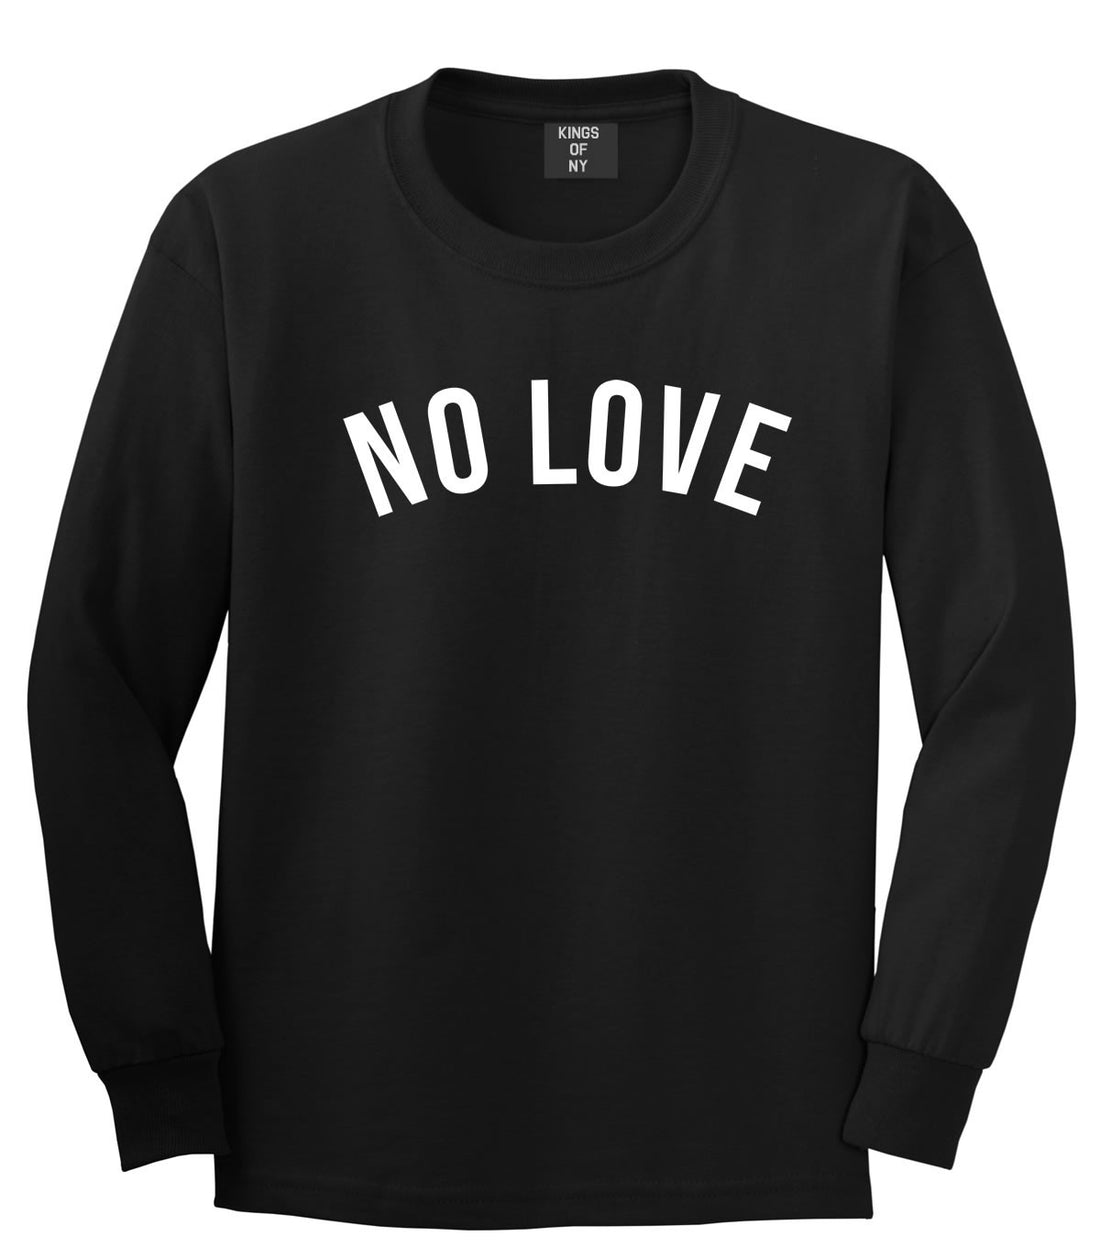 No Love Long Sleeve T-Shirt in Black by Kings Of NY